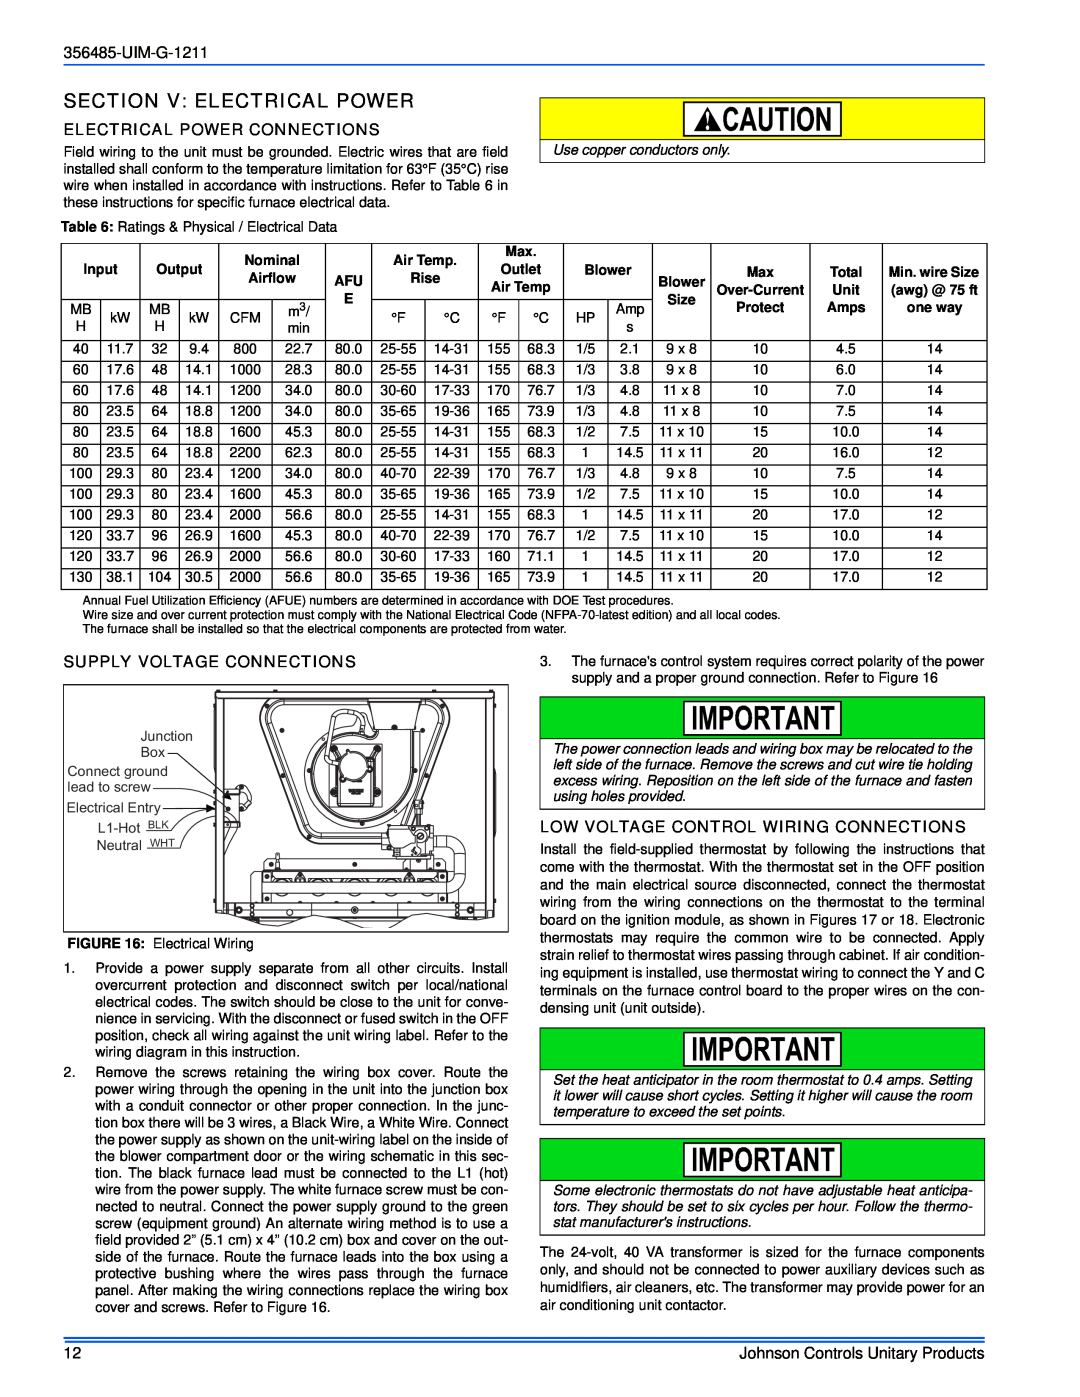 Johnson Controls TGLS*MP Section V Electrical Power, Electrical Power Connections, Supply Voltage Connections, UIM-G-1211 